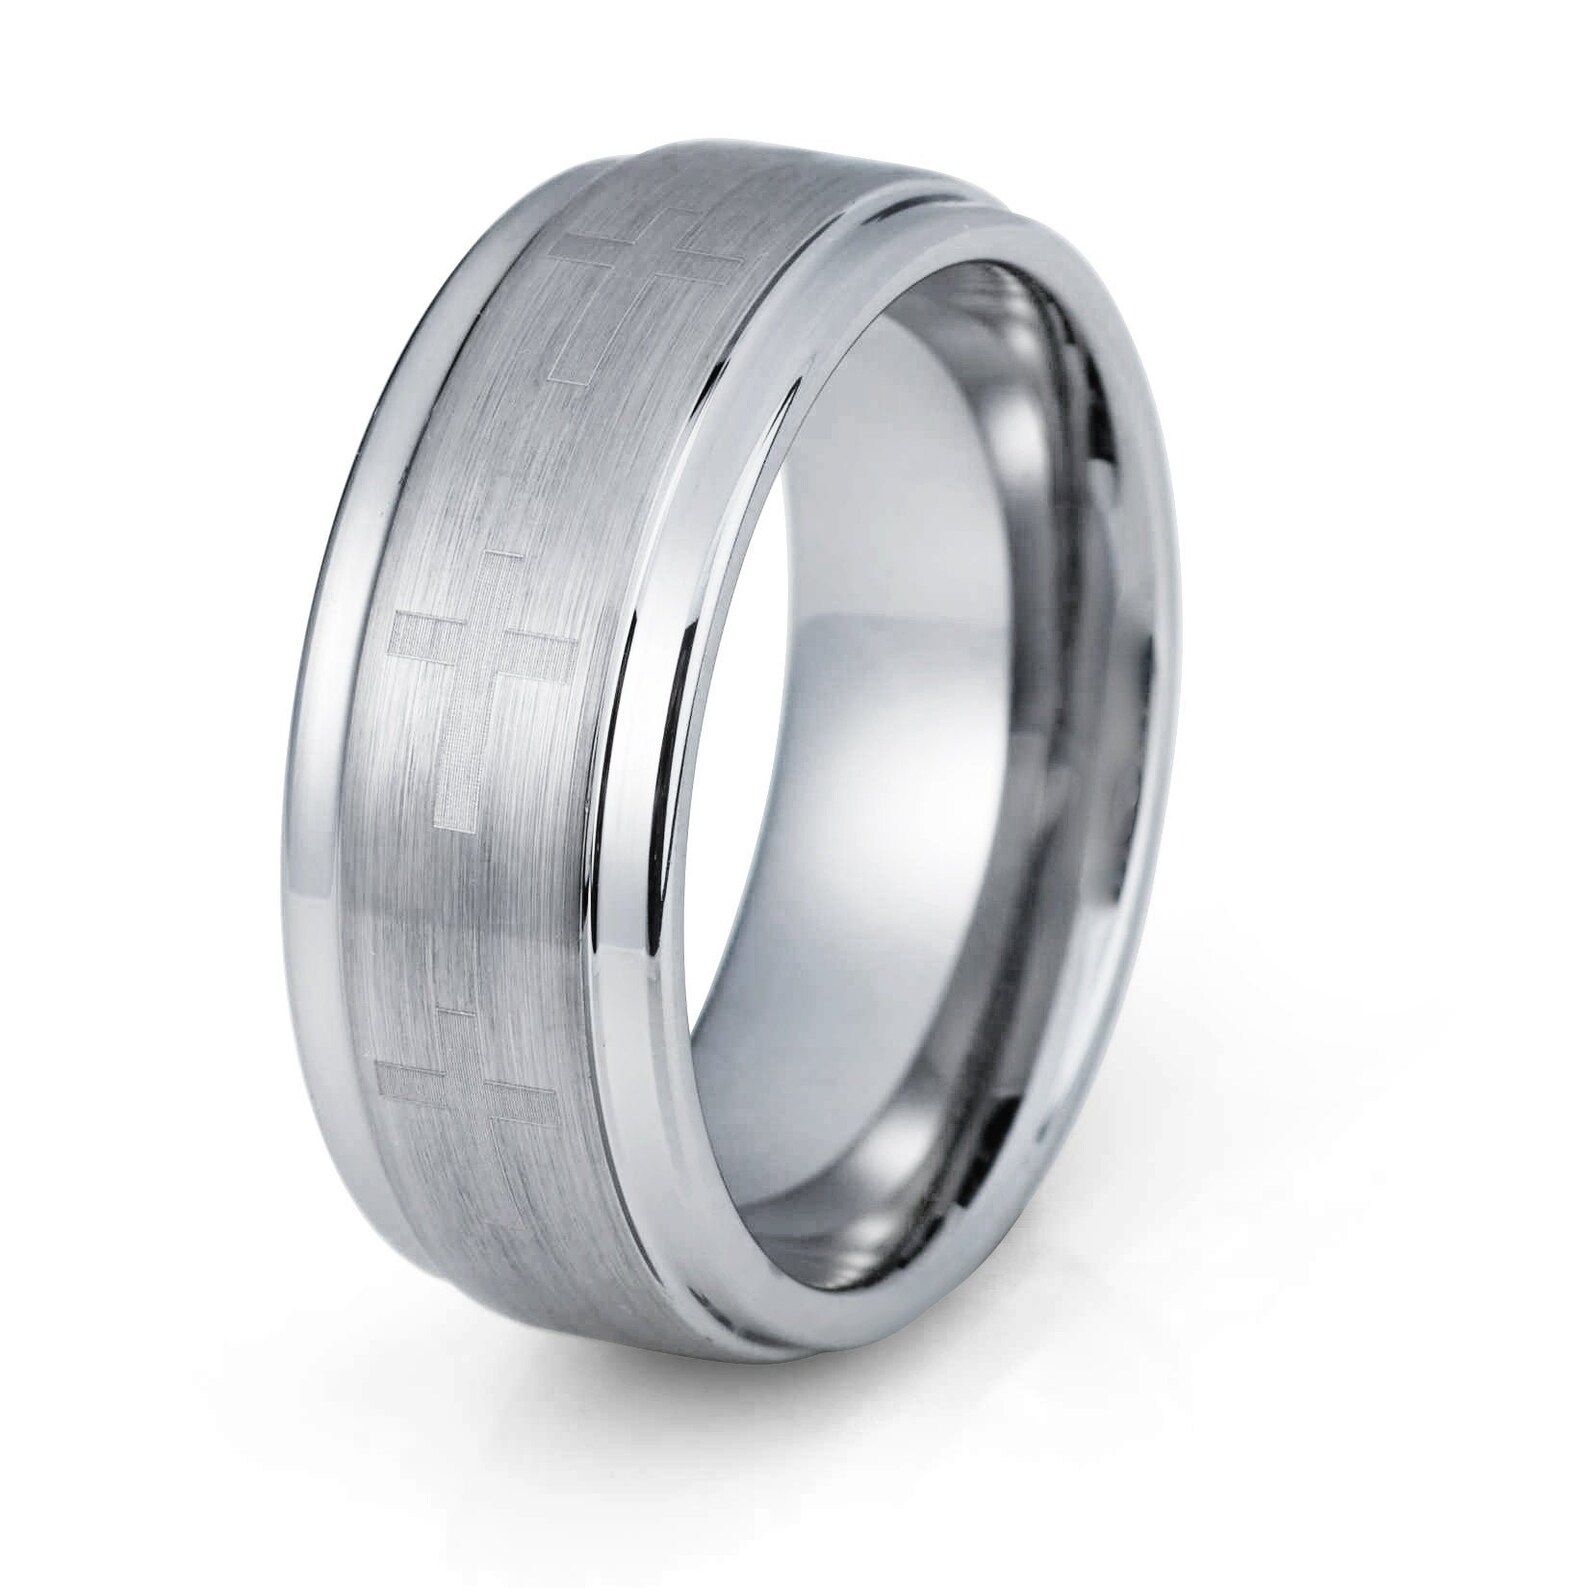 Tungsten Ring Brushed Mens Wedding Band 7mm Silver Cross